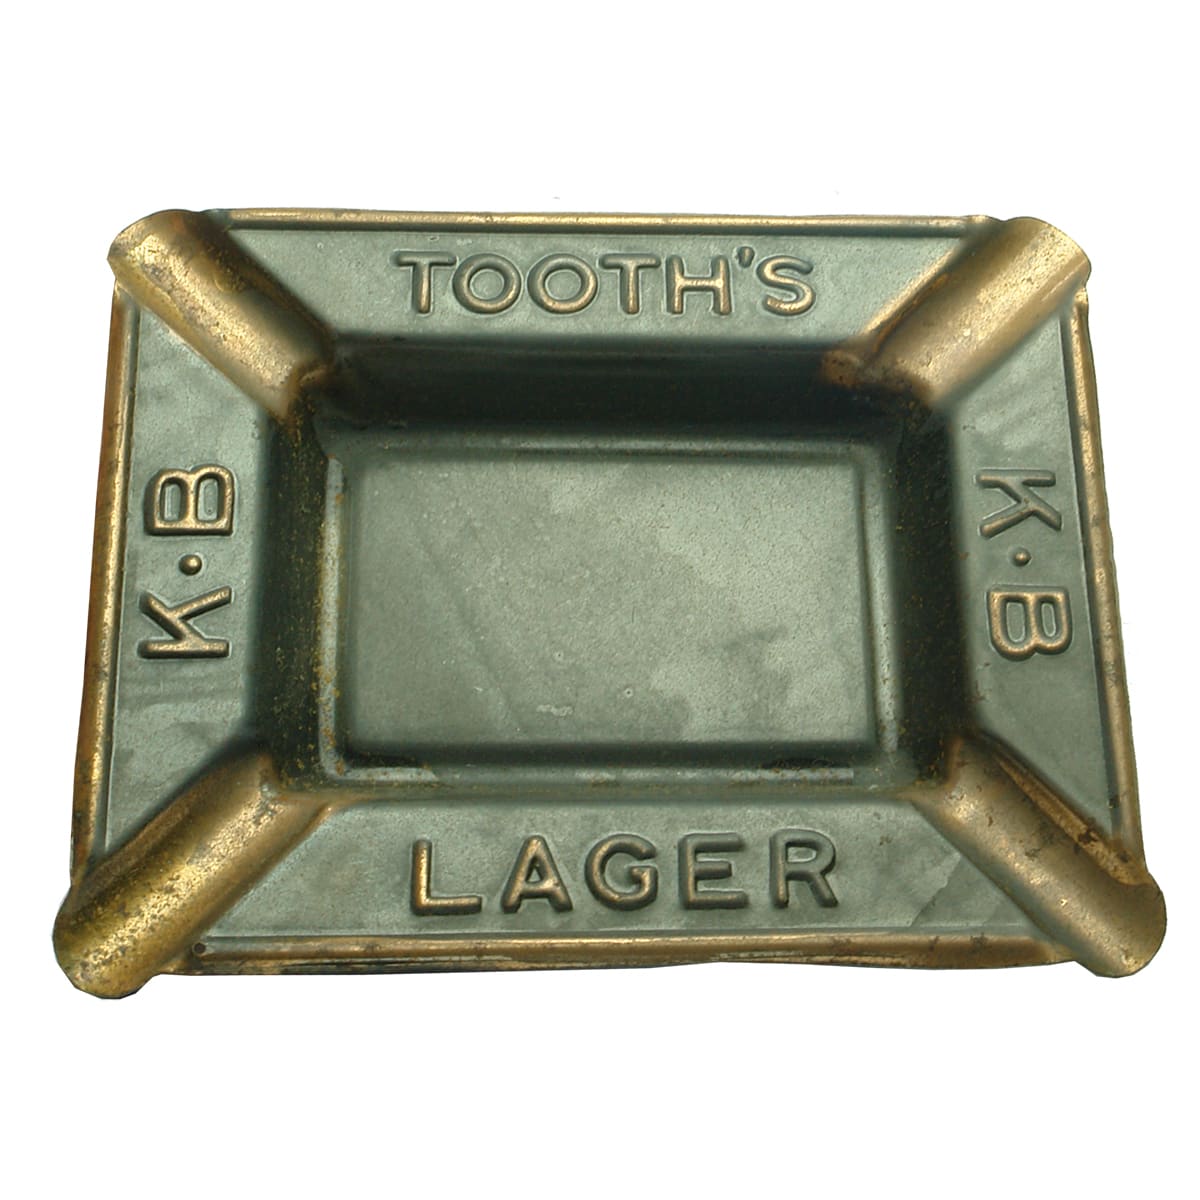 Ashtray. Tooth's K. B Lager. (Sydney, New South Wales)